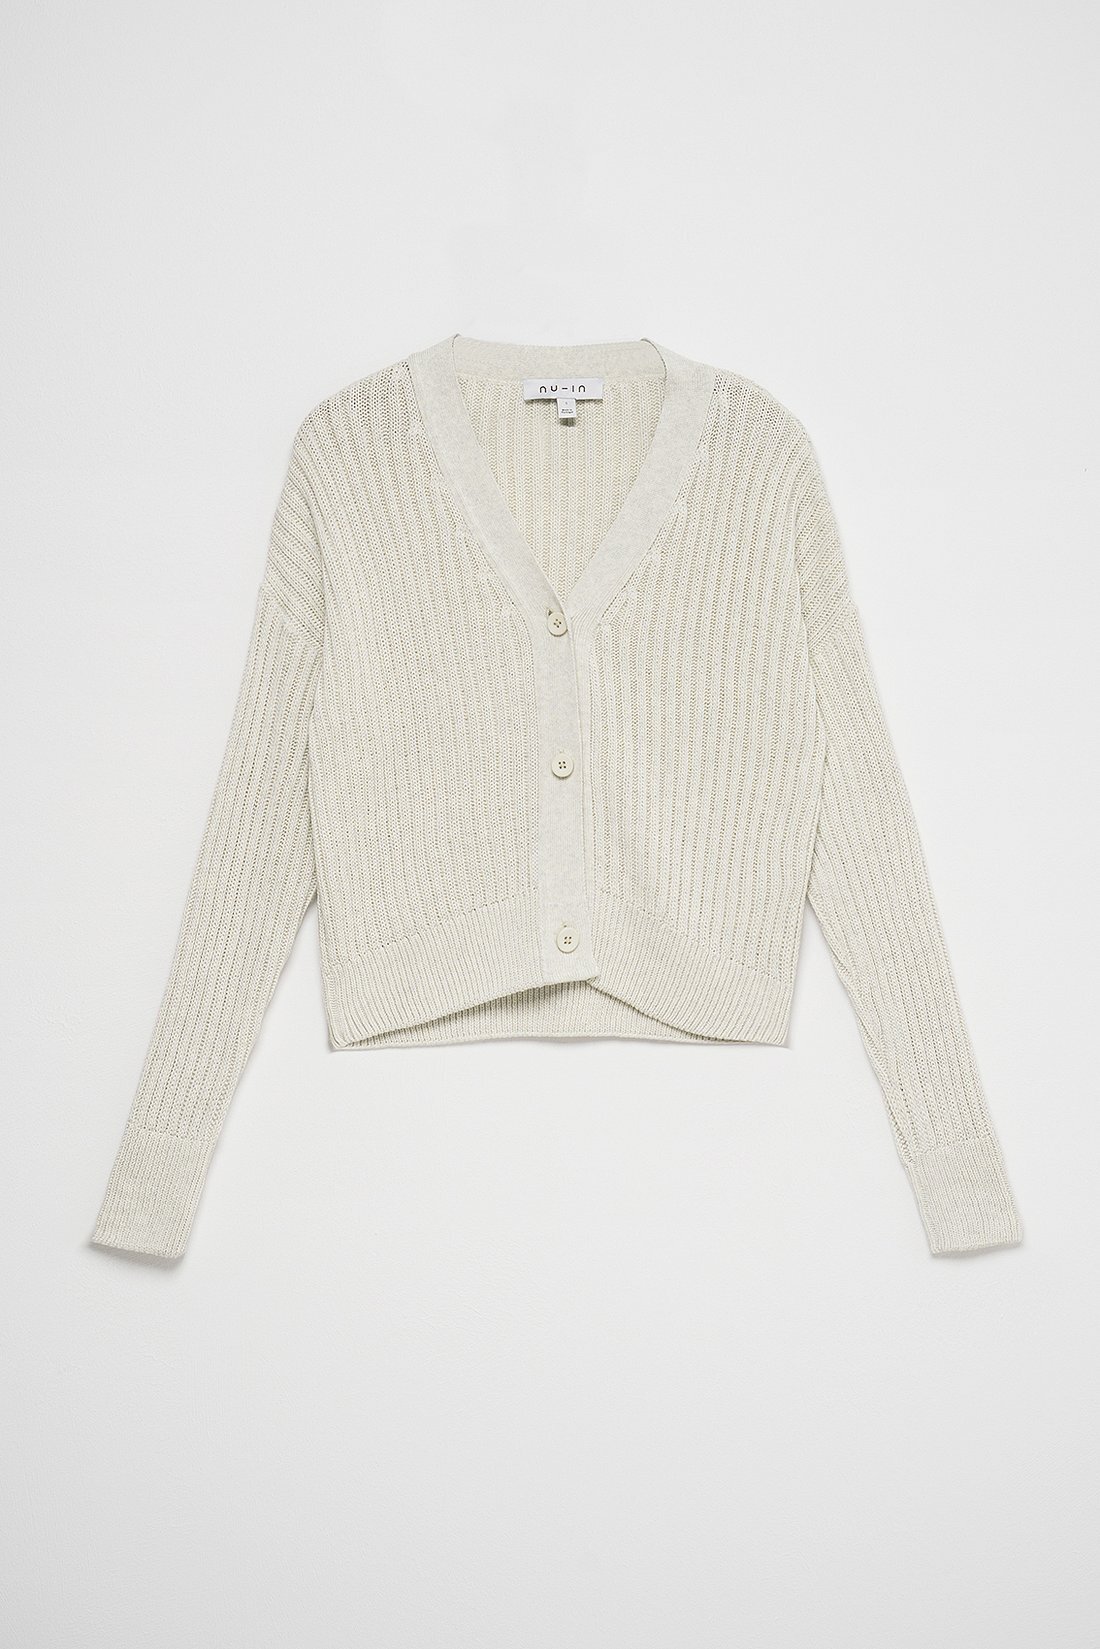 Nu-In Ribbed Cropped Cardigan